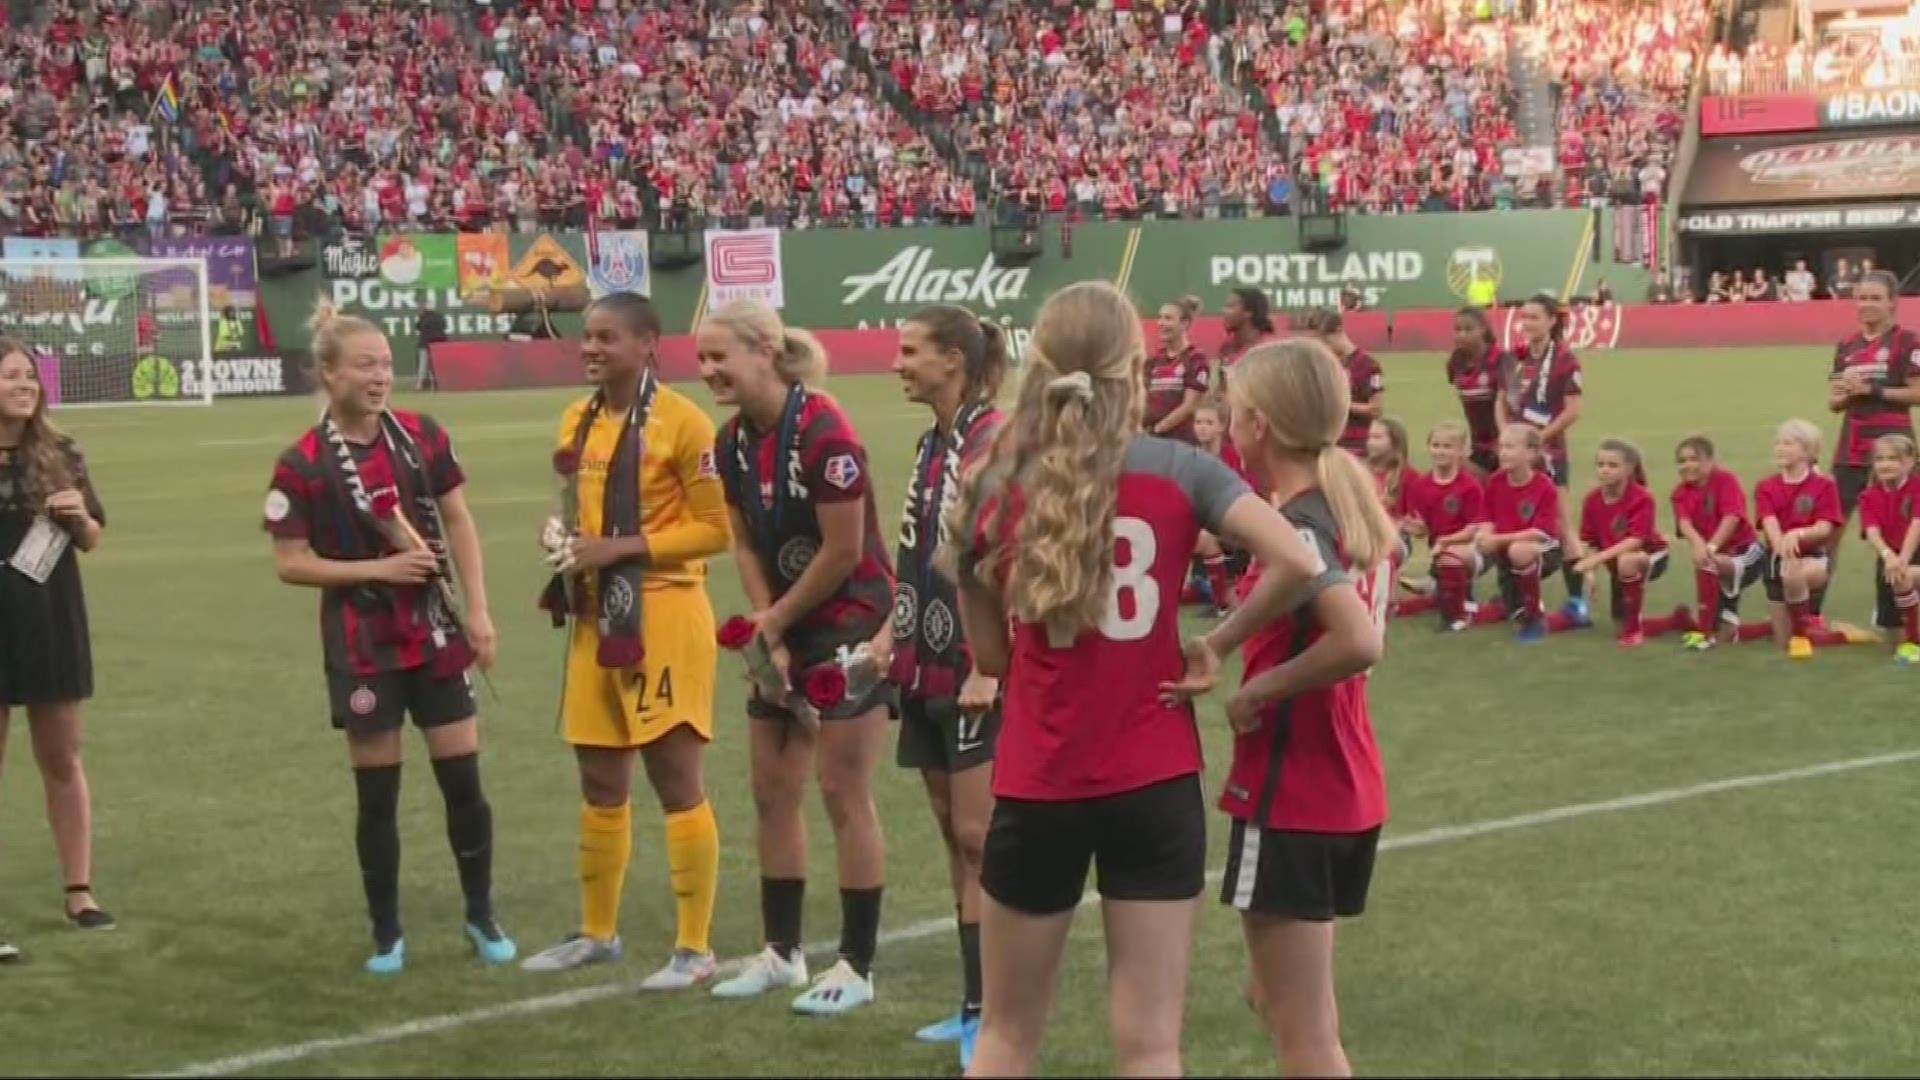 The Portland Thorns reunited with their World Cup champion teammates, Tobin Heath, Lindsey Horan, Adrianna Franch and Emily Sonnett, back for their first home game.